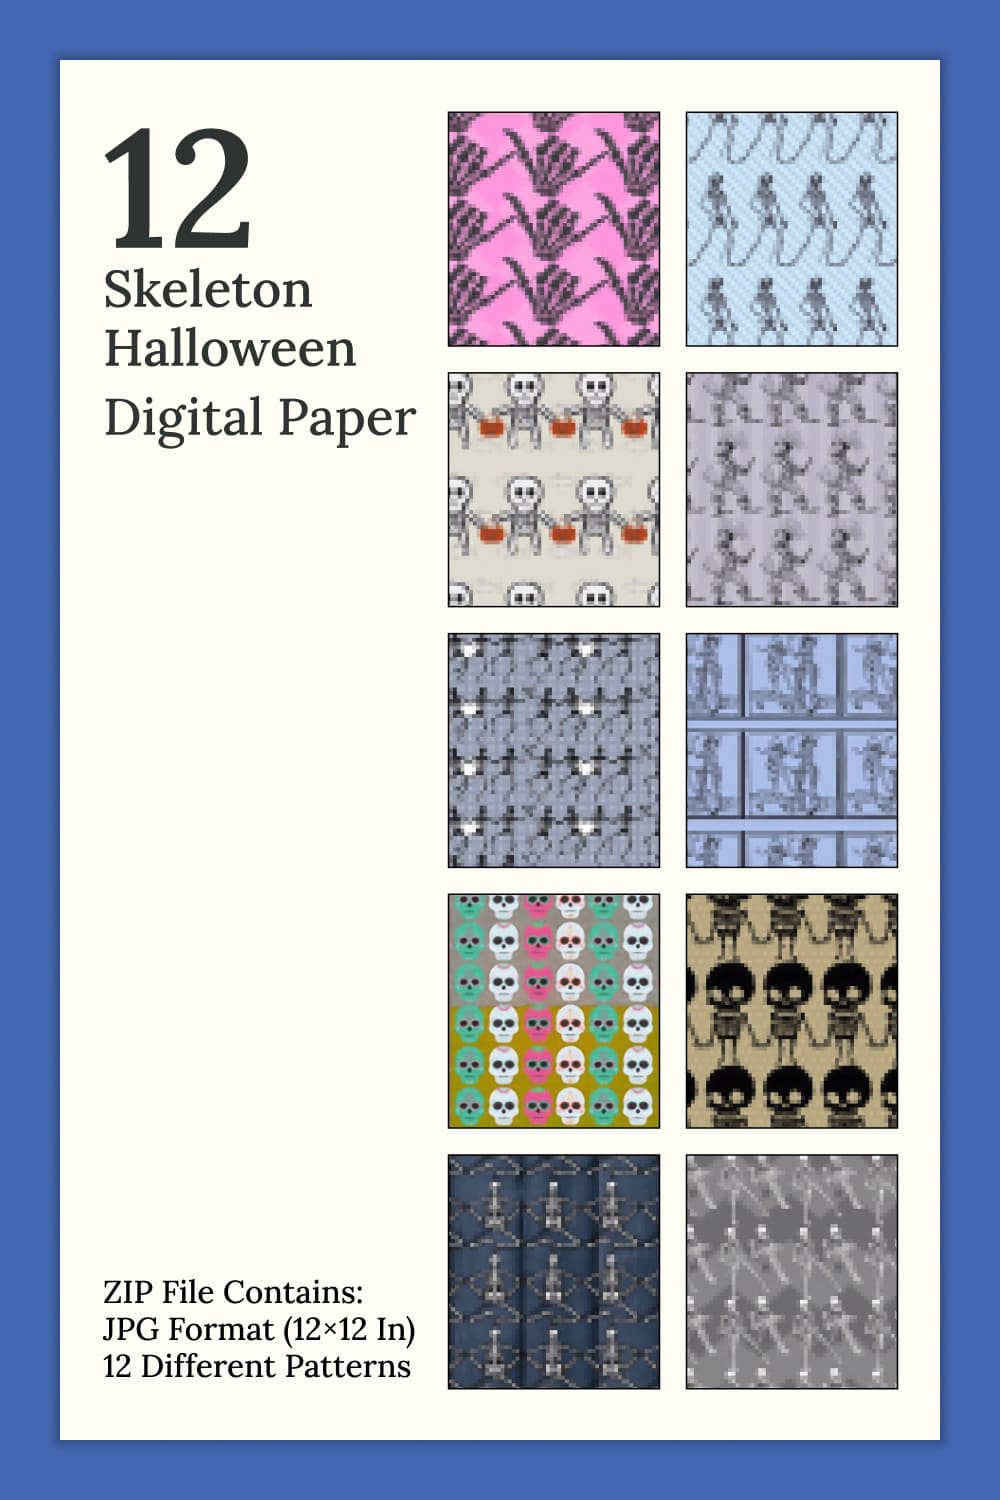 Collection of charming paper retro patterns with skeletons.